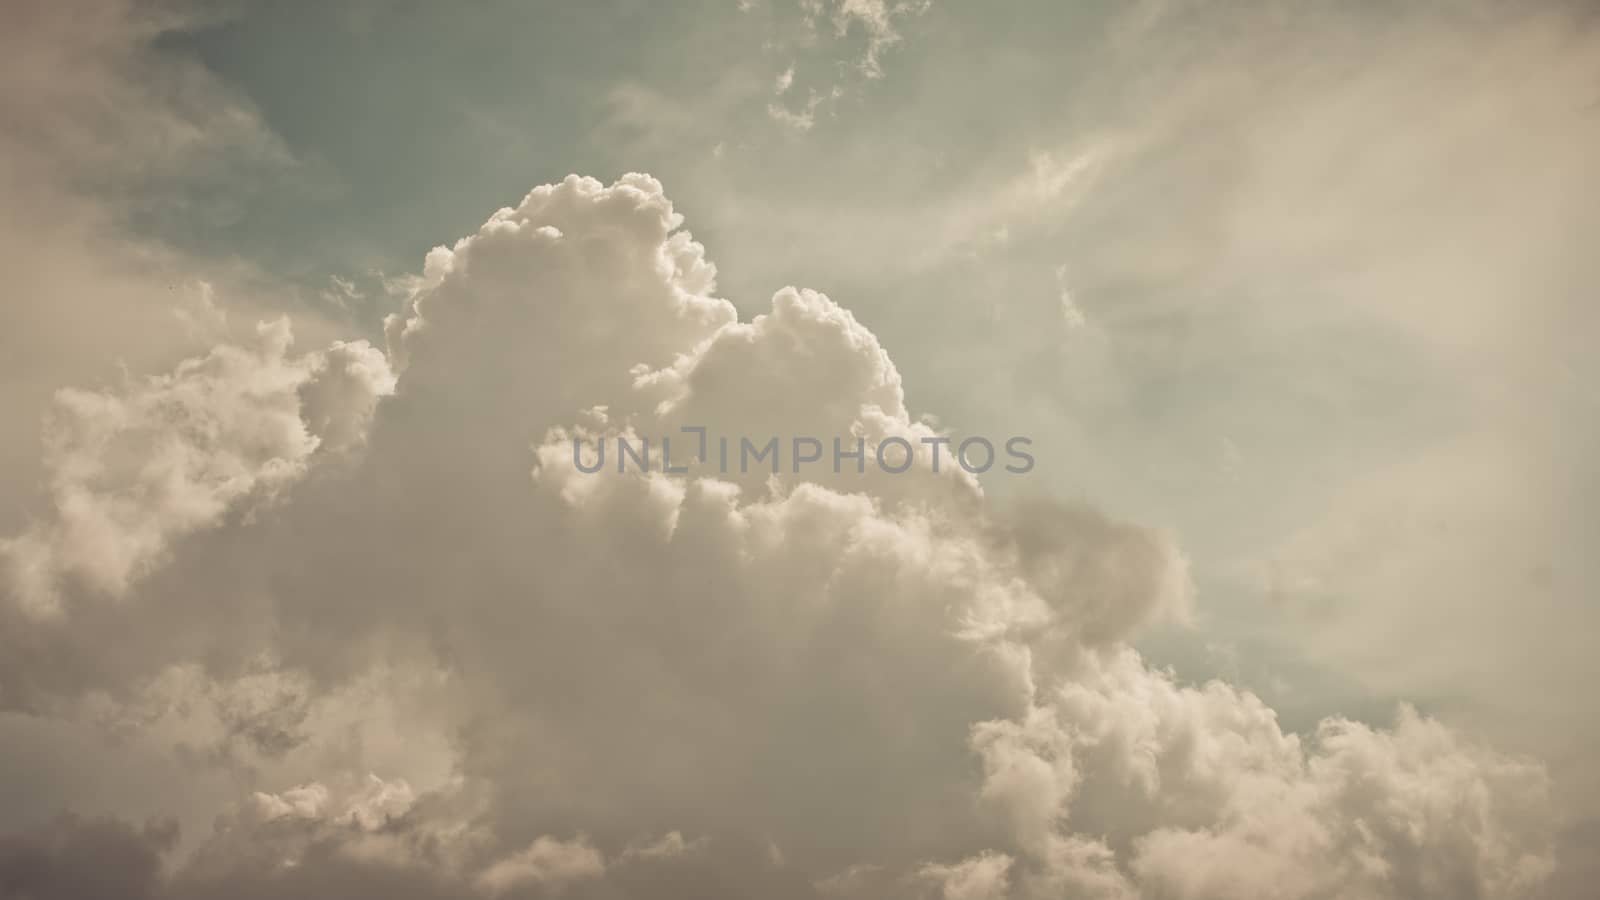 Nice clouds in blue sky in vintage style by pixbox77